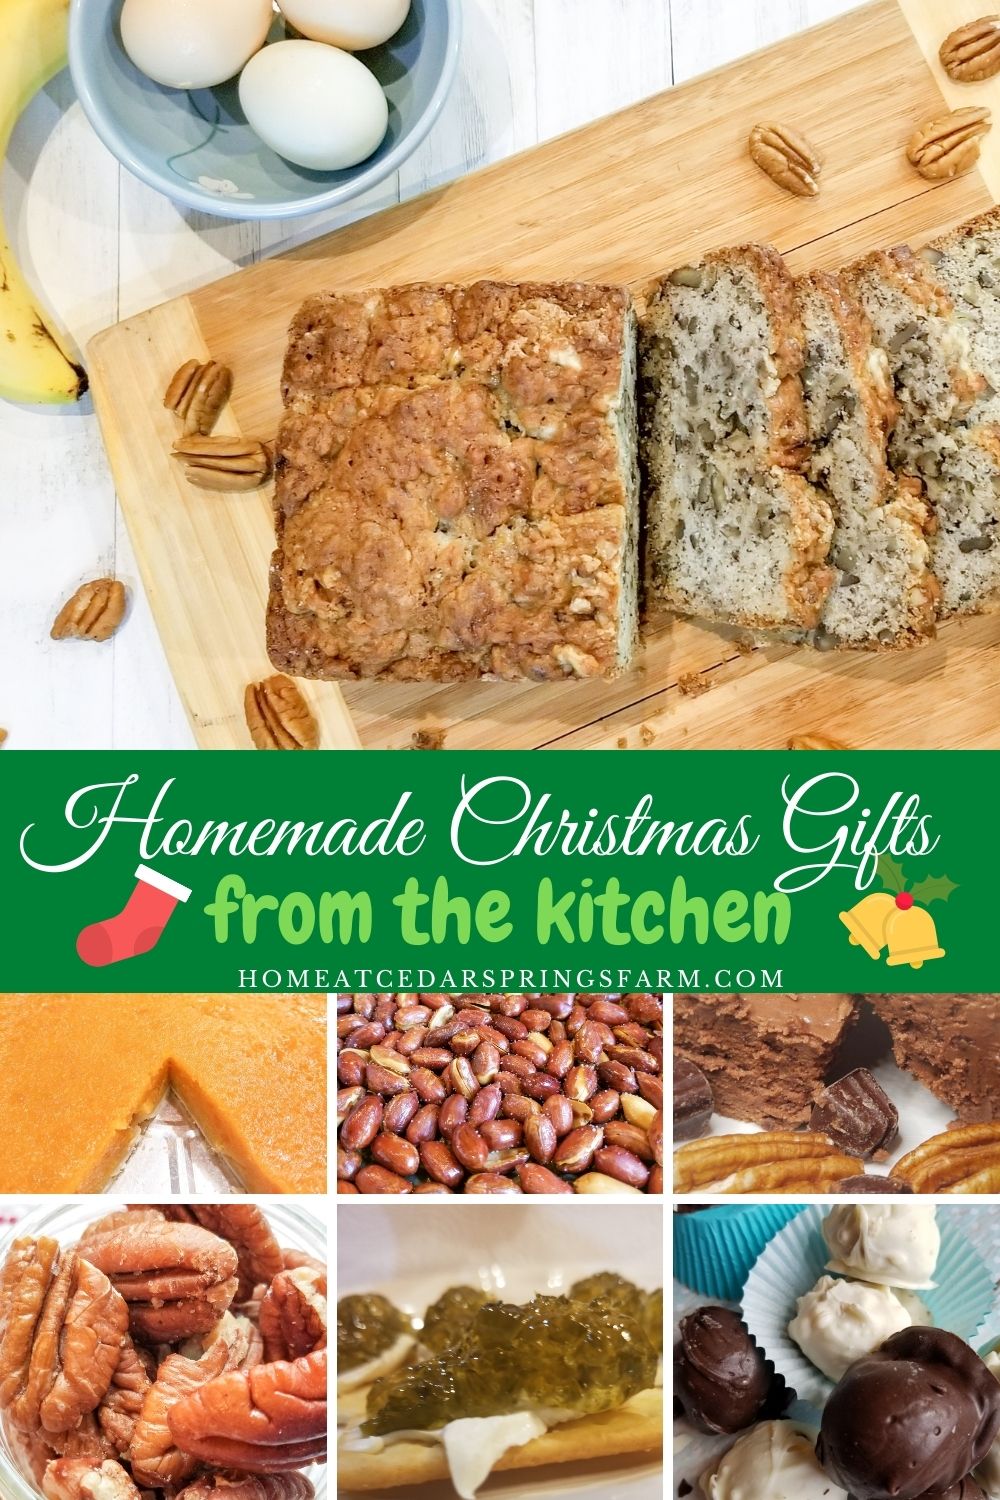 Homemade Christmas Gifts from the Kitchen